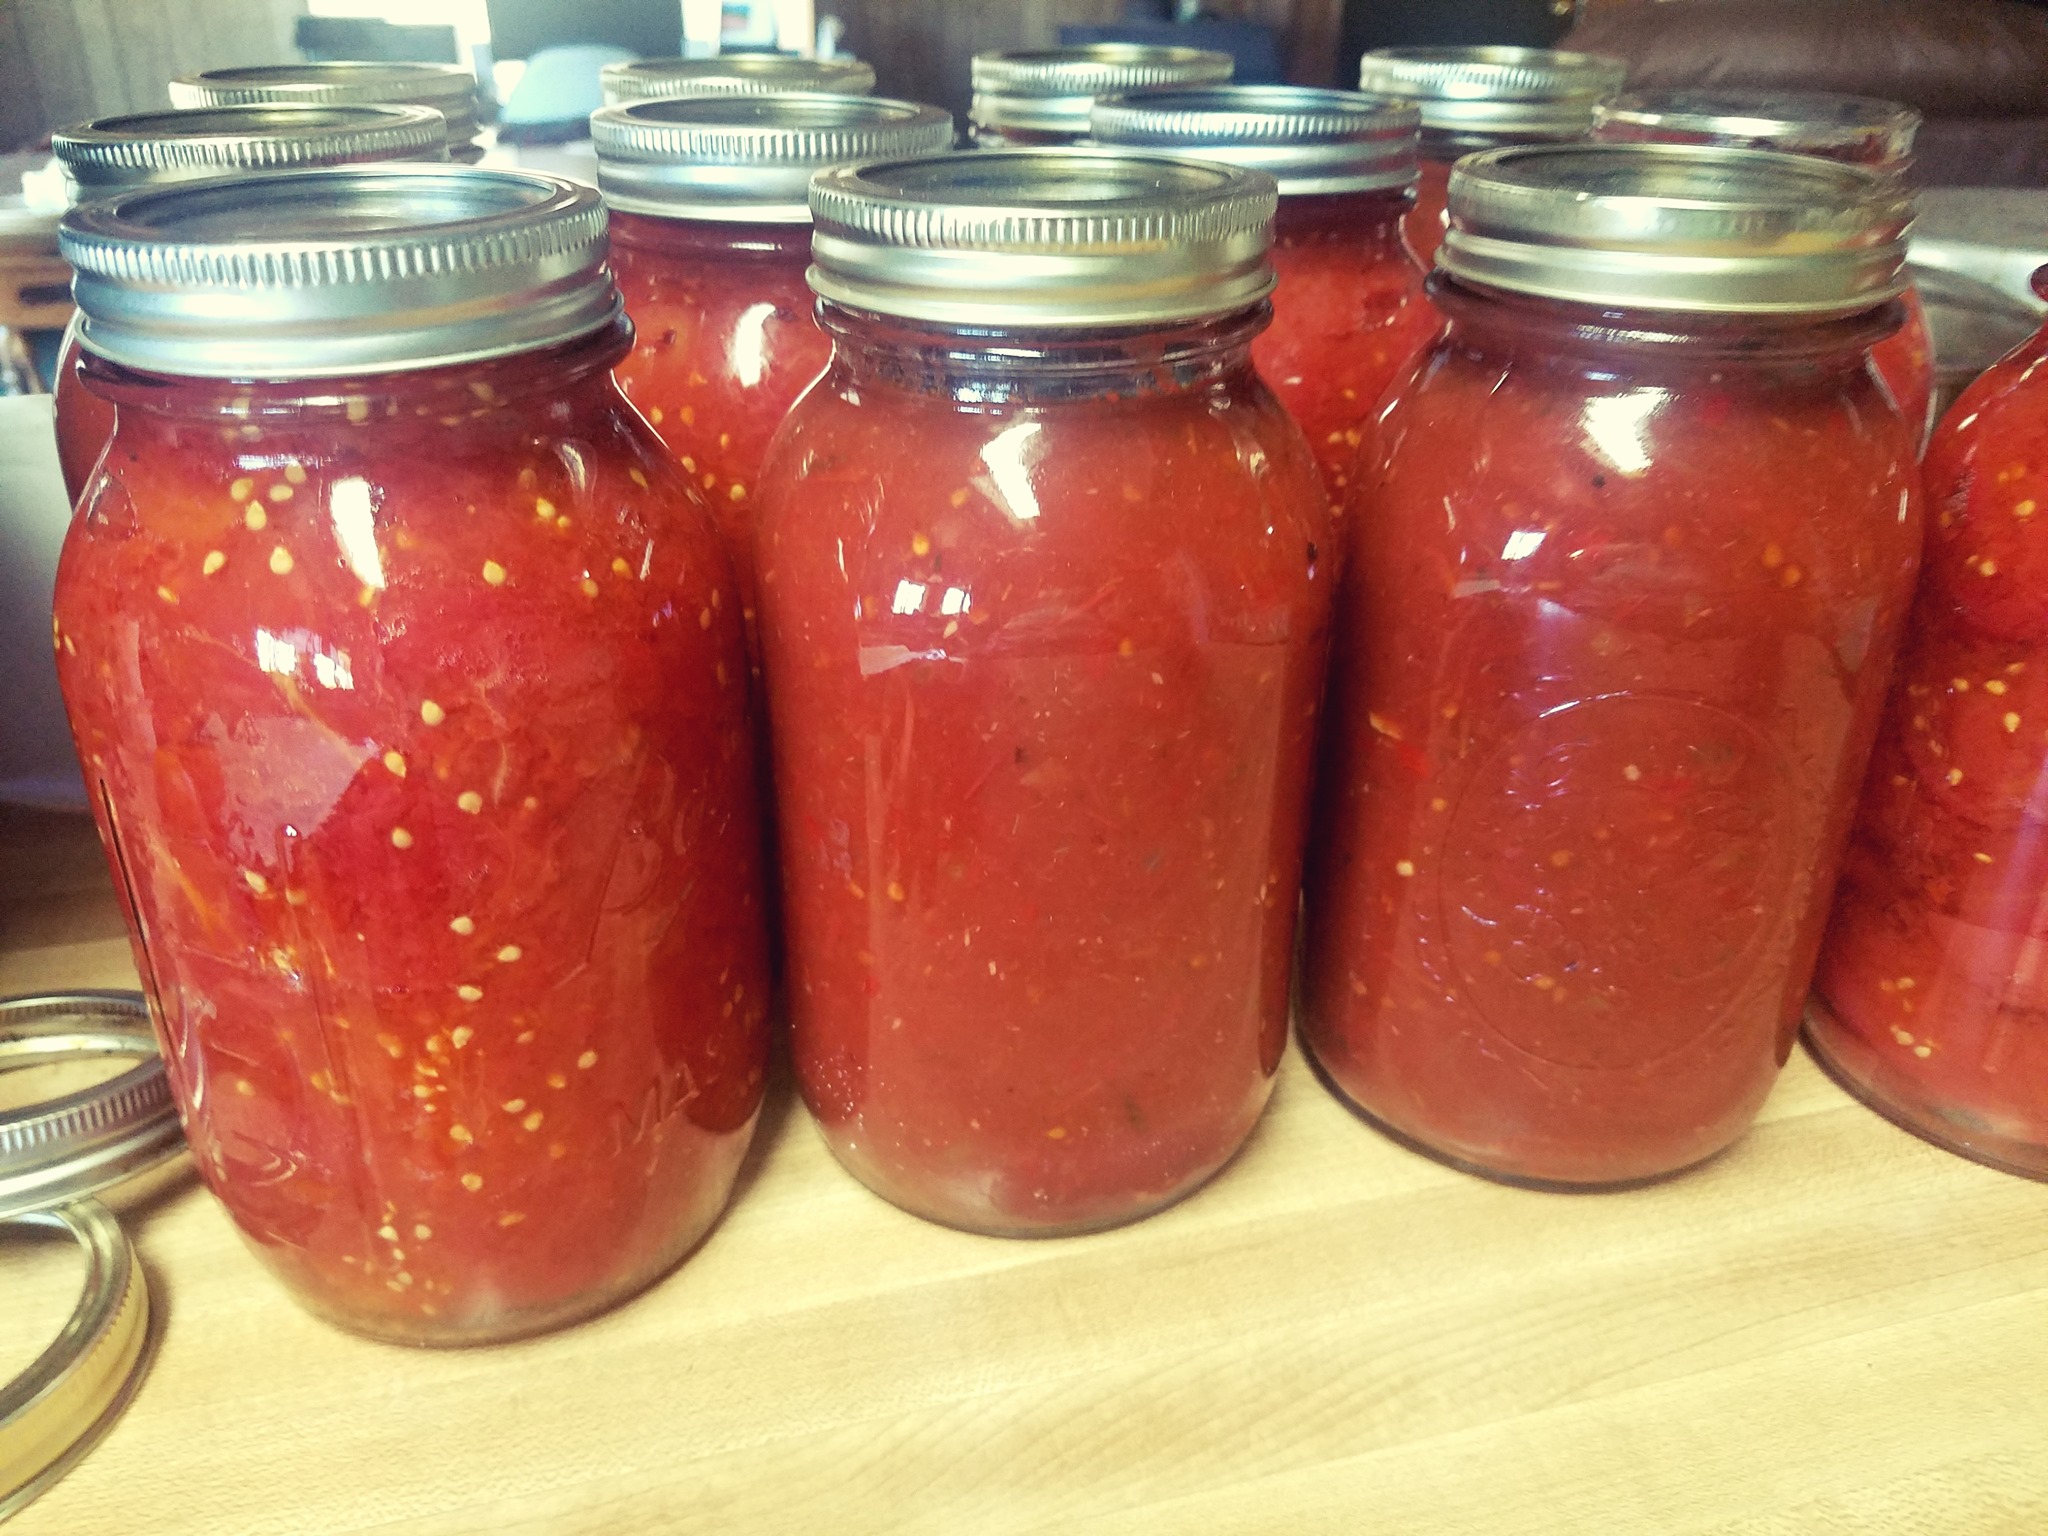 Tomato sauce, salsa making time! It's not to late to pick your own or place an order.